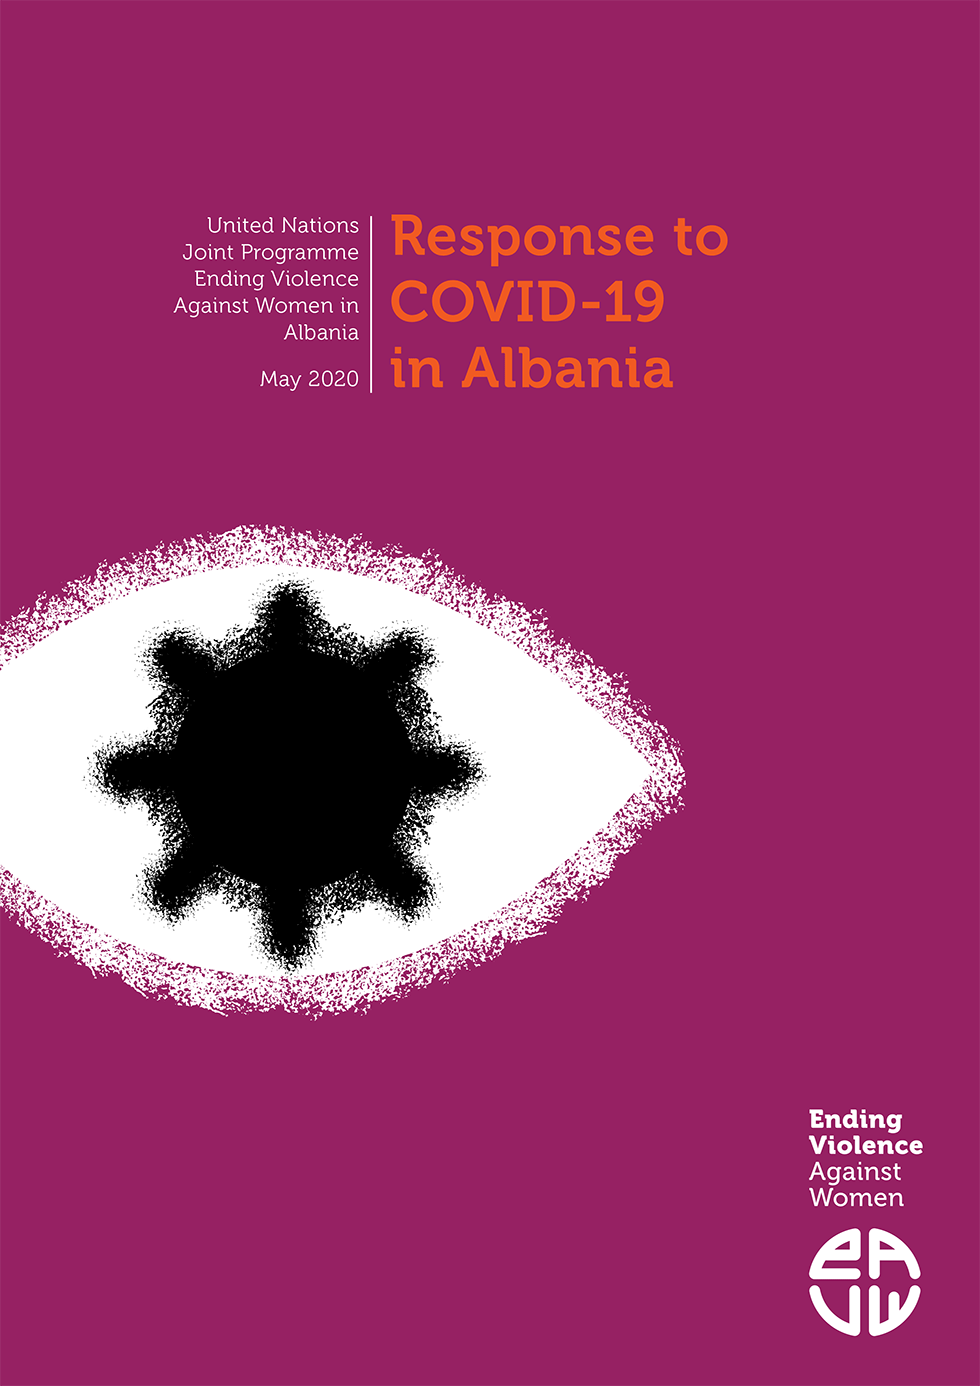 Ending Violence Against Women-Response to COVID-19 in Albania